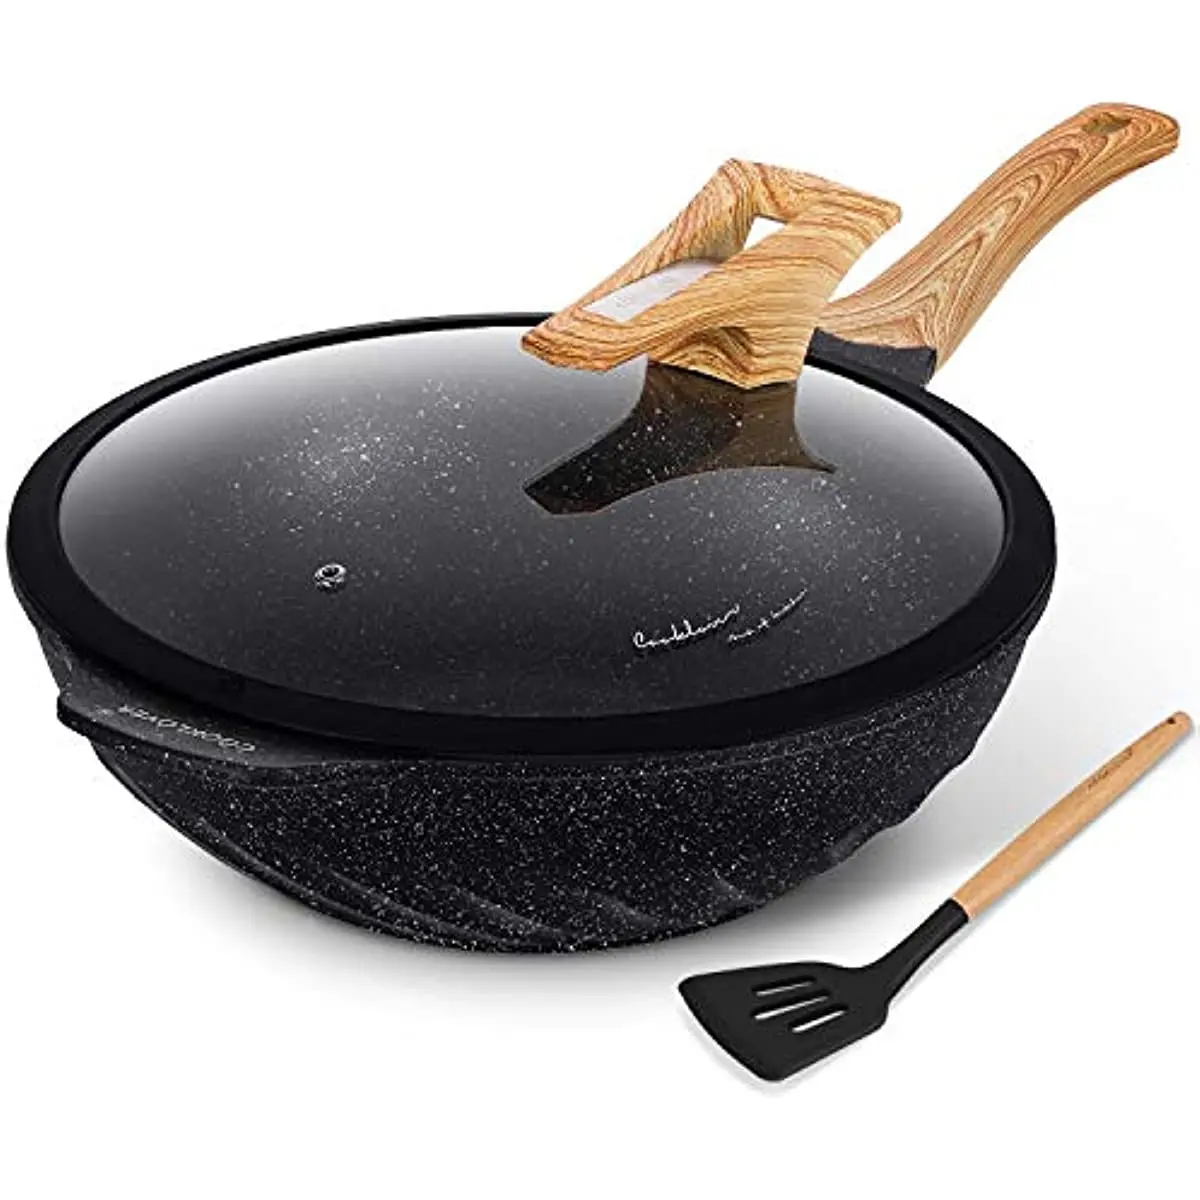 

COOKLOVER Nonstick Woks and Stir Fry Pans Die-cast Aluminum Scratch Resistant 100% PFOA Free Induction Wok Pan with Lid